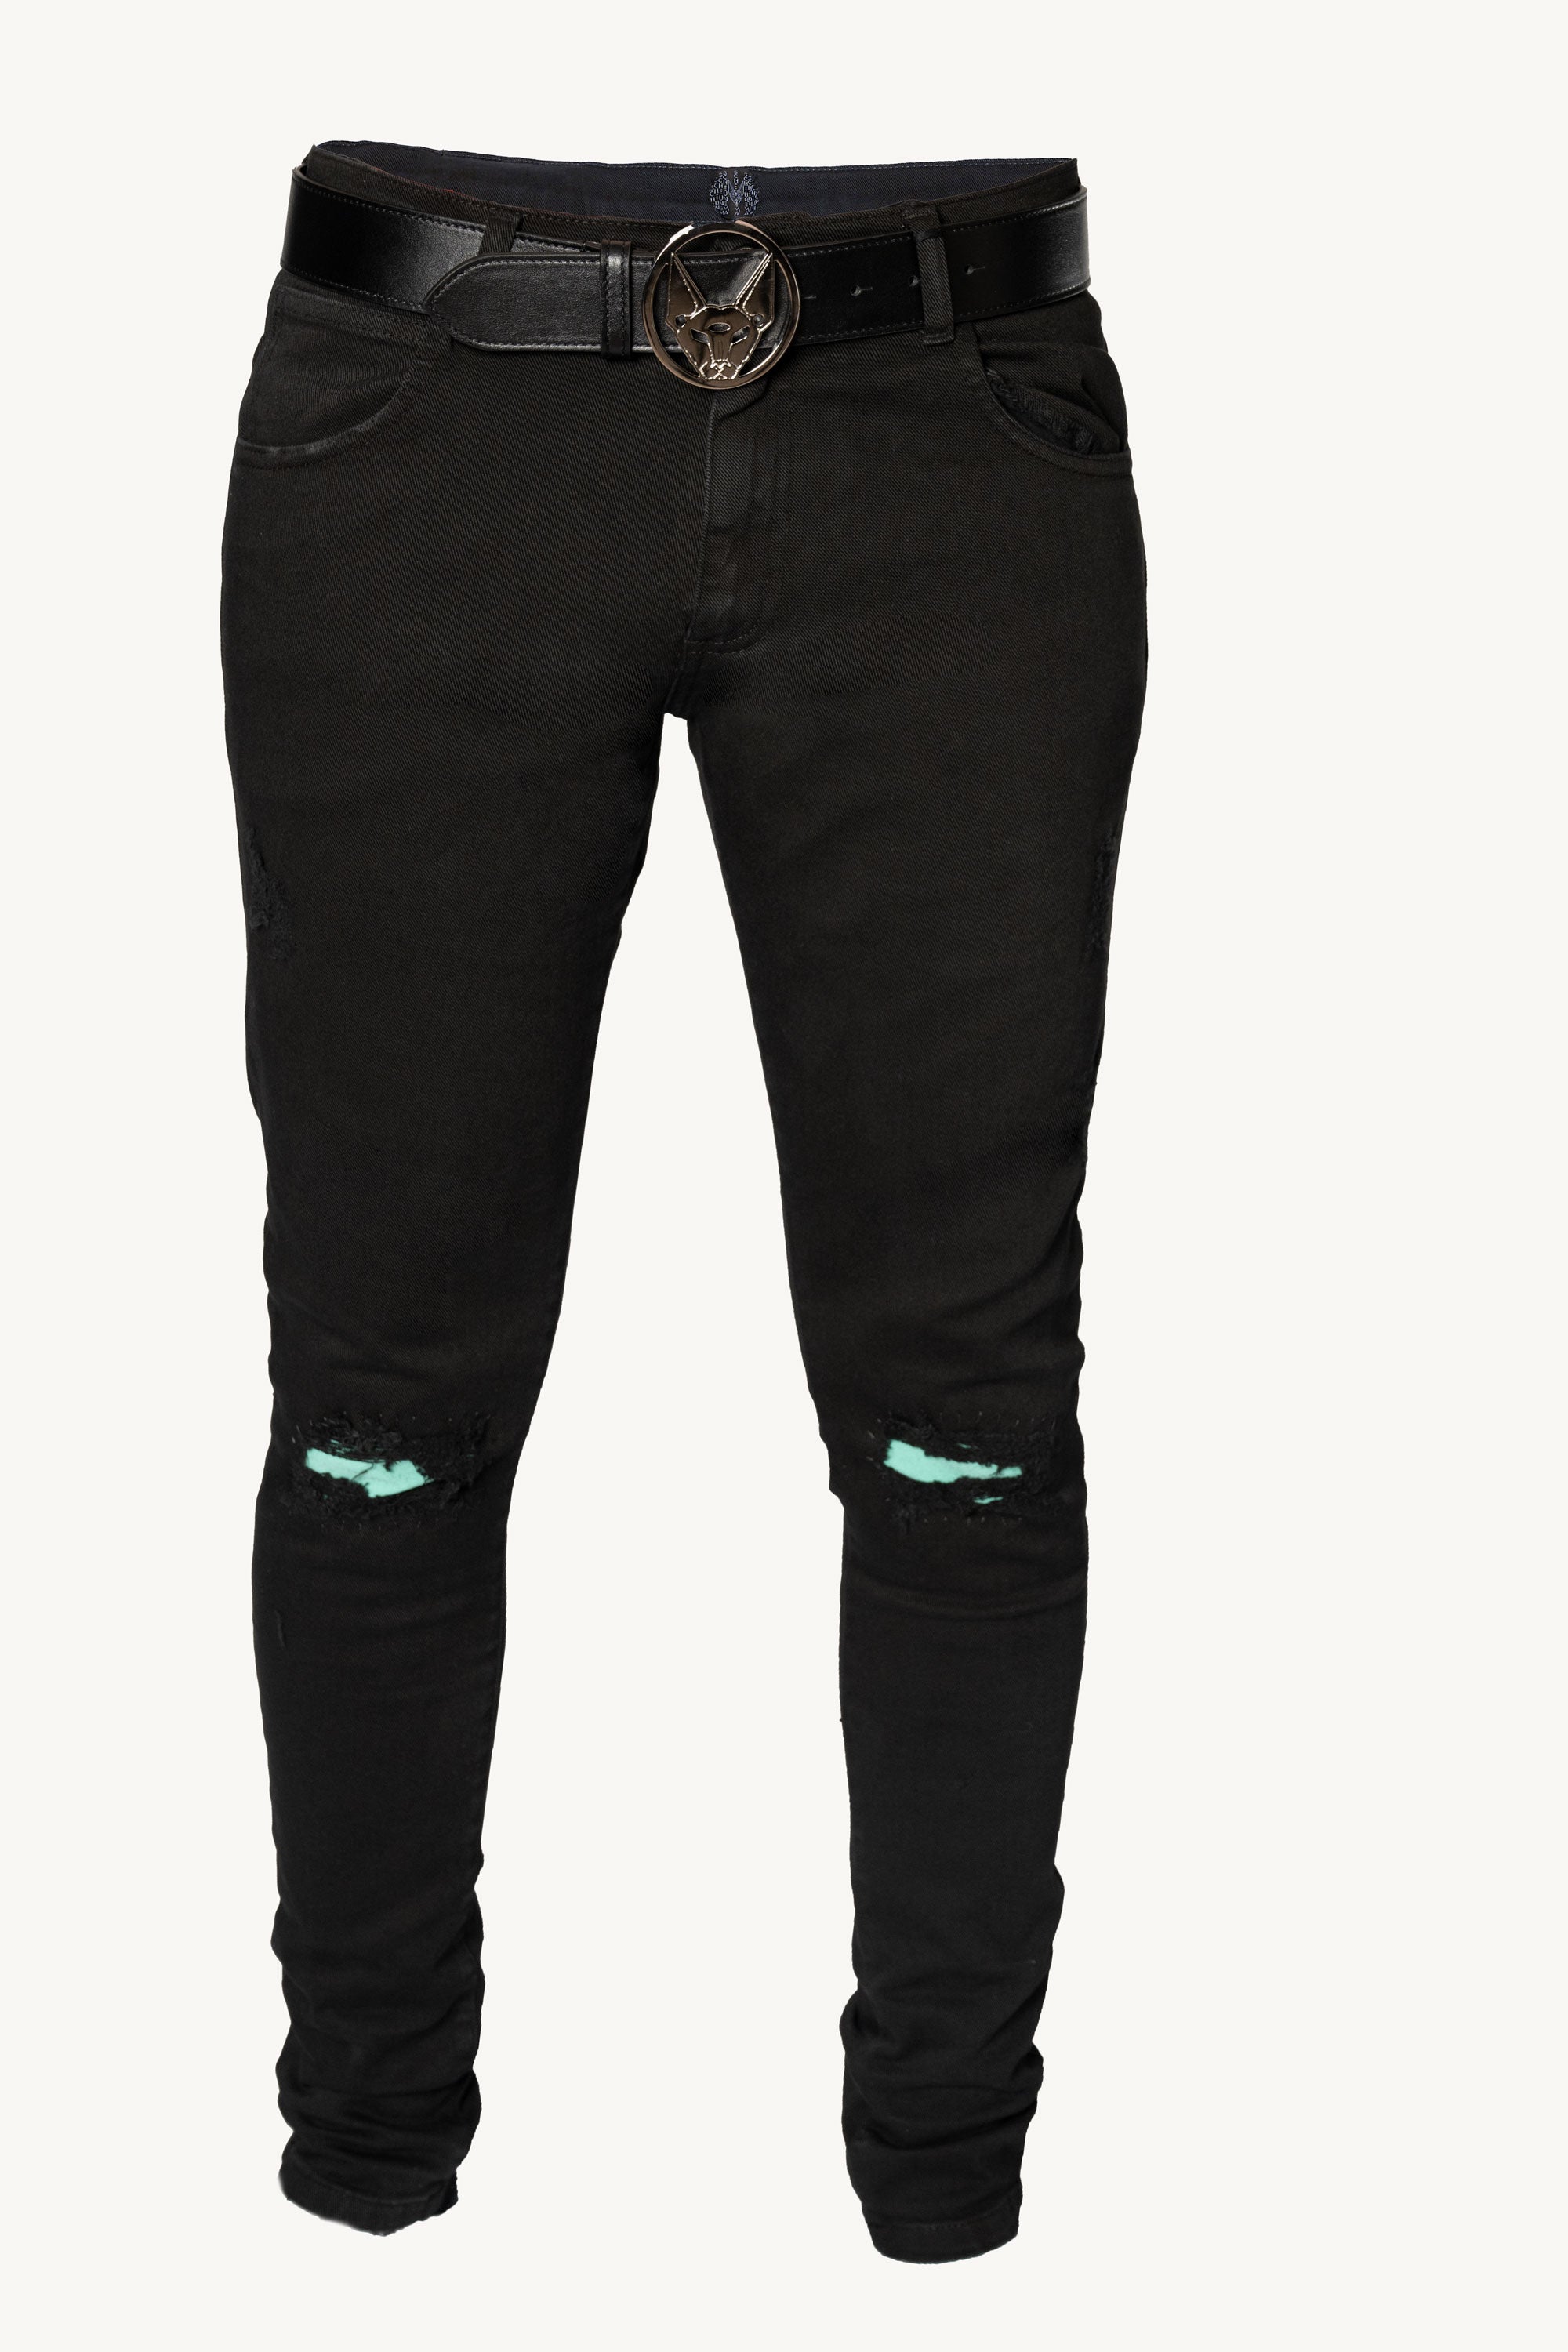 Green Patch Skinny Jeans